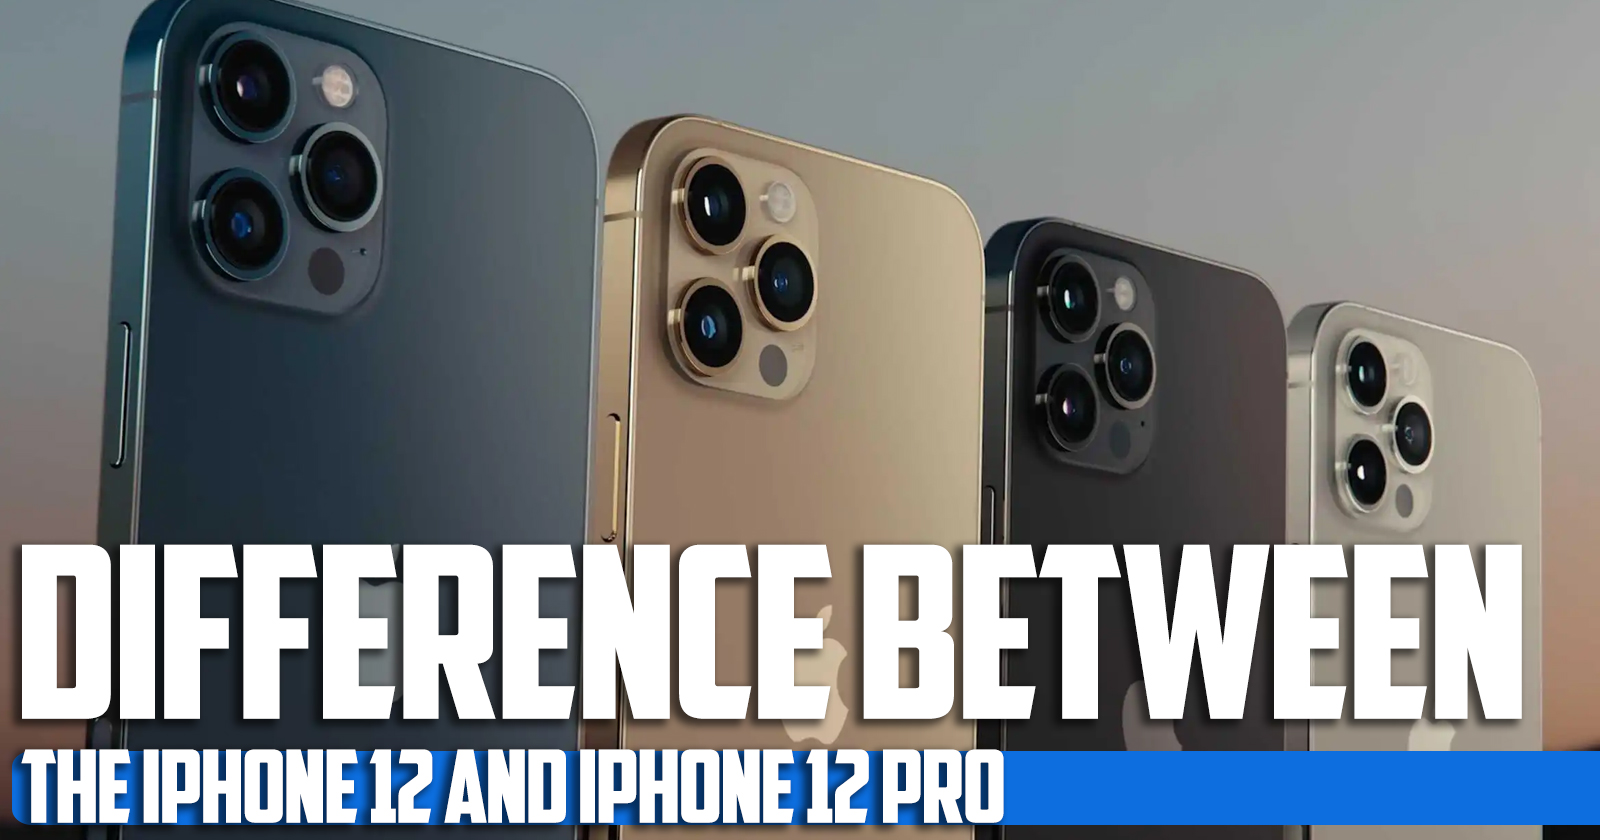 What is difference between the iPhone 12 and iPhone 12 pro?